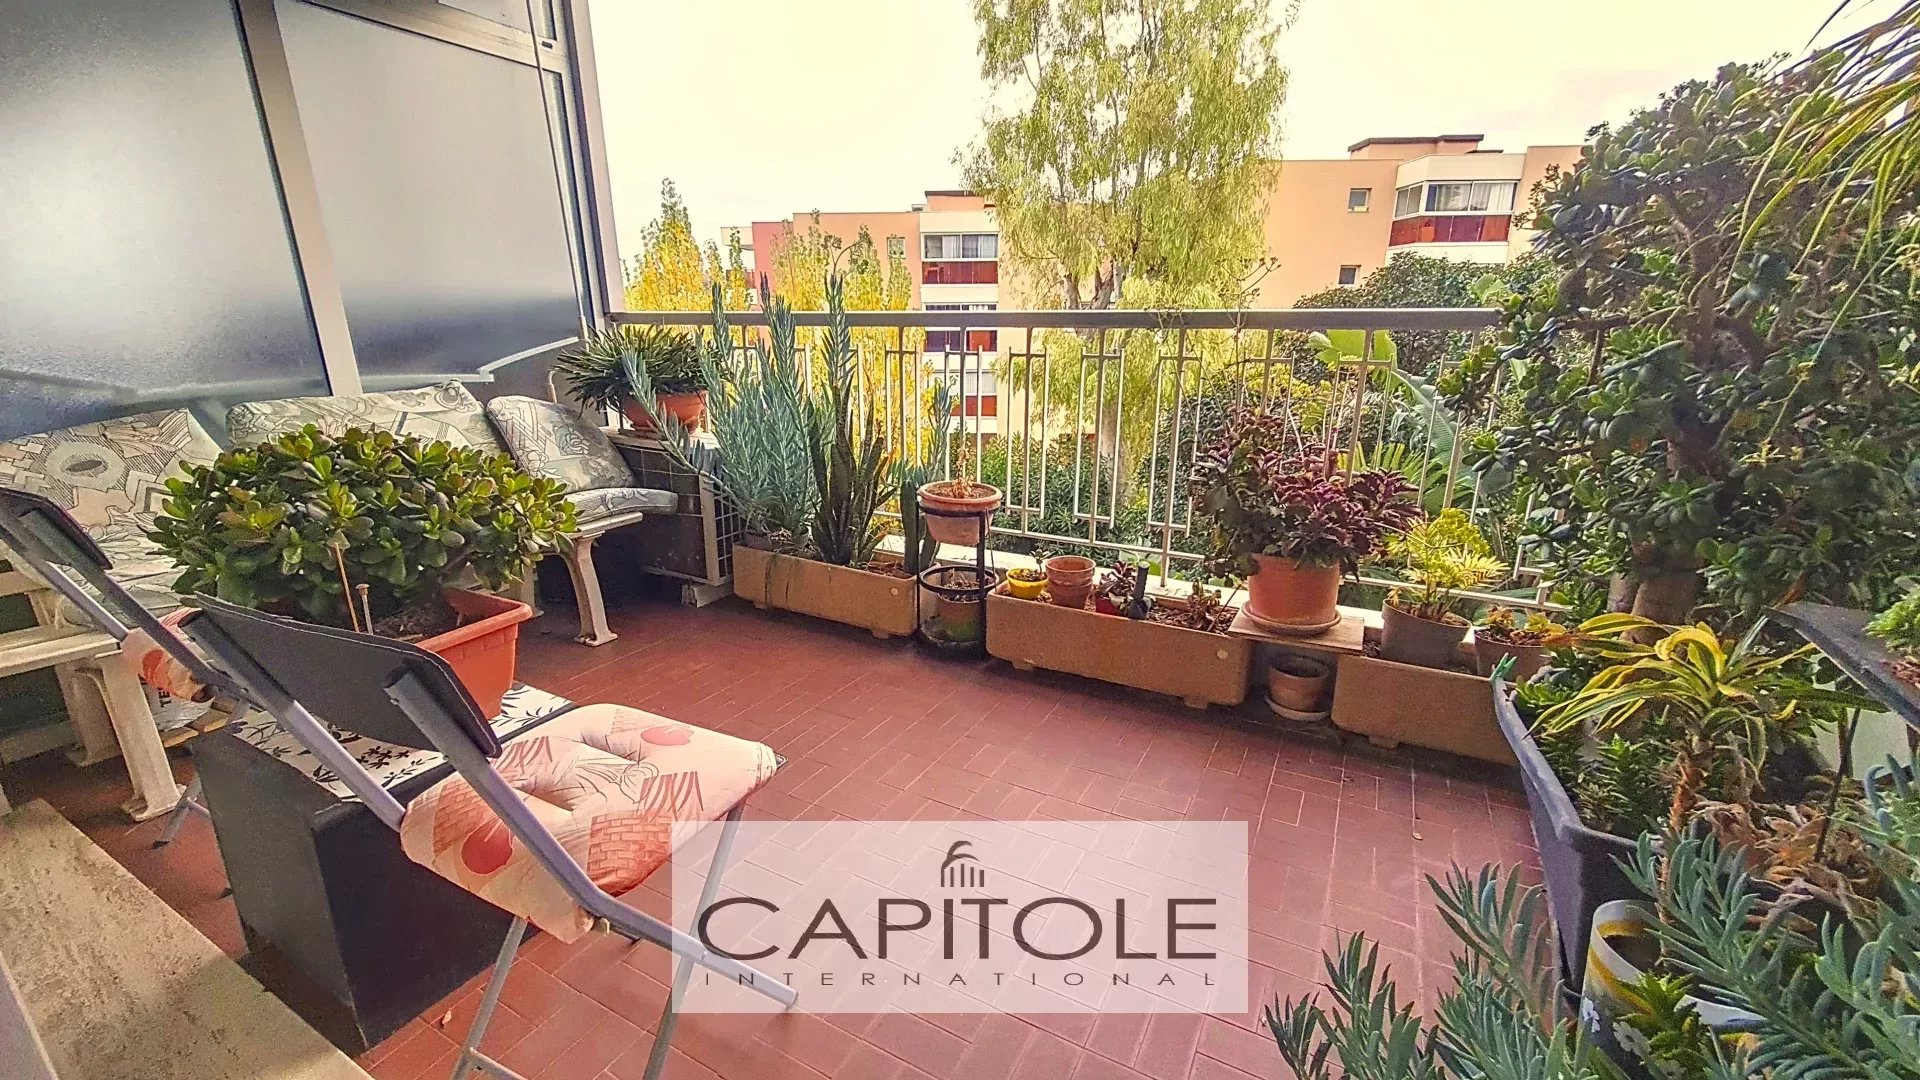 ANTIBES - FOR SALE 2-bedrooms 72 sqm, south facing, with cellar and parking